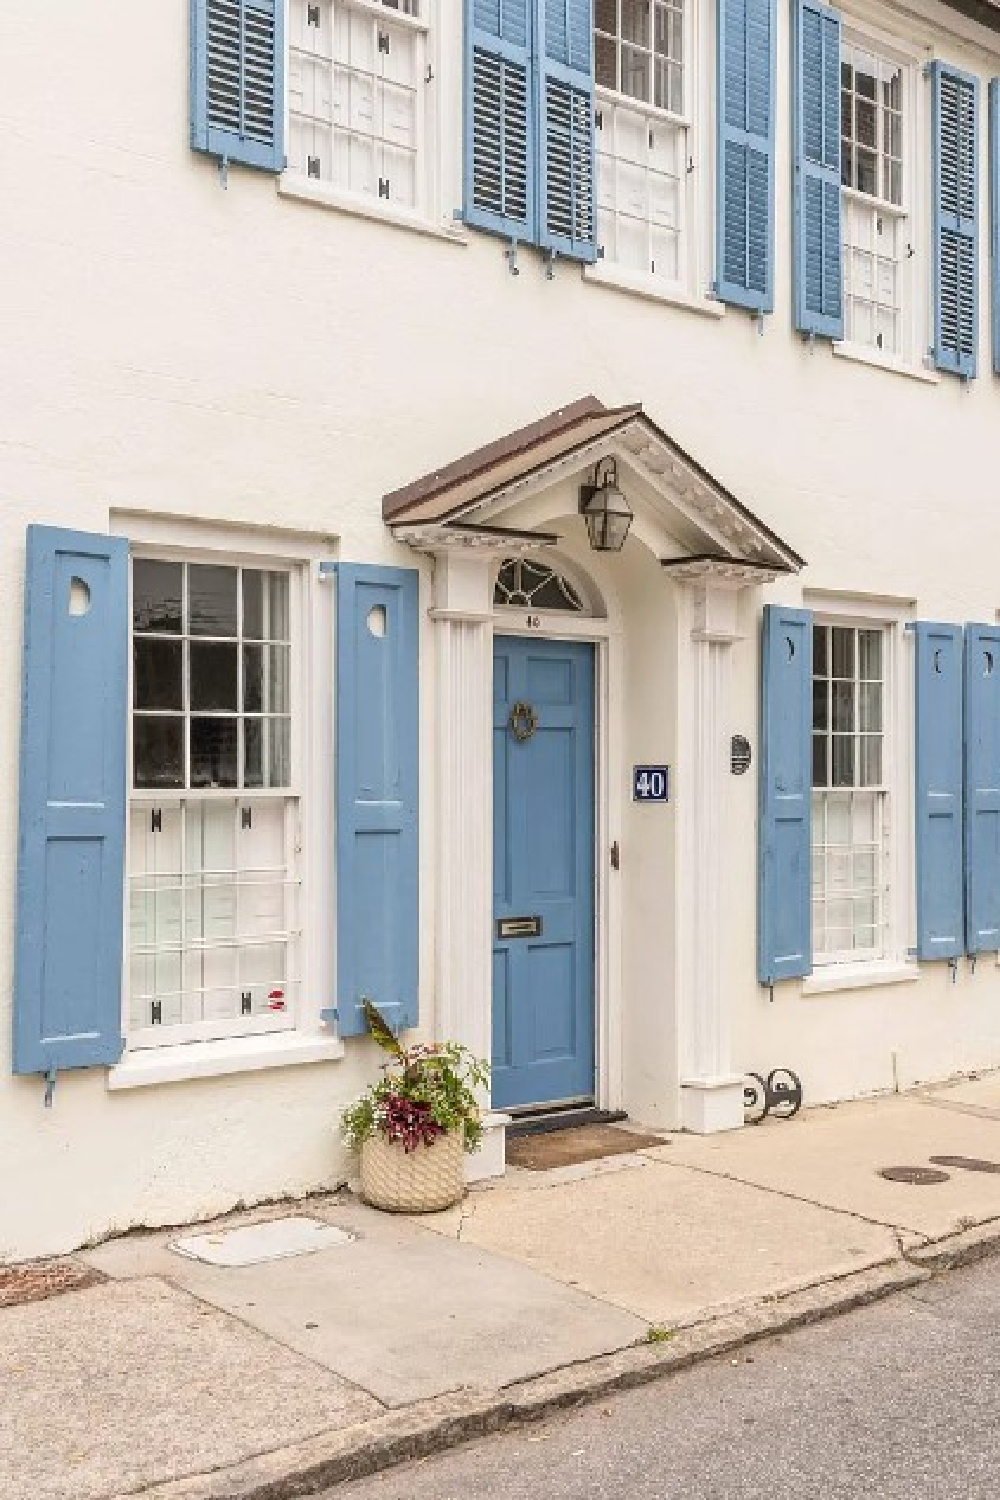 Beautiful Charleston exterior with French blue shutters - 40 Tradd St. was built in 1718 and appeared in "The Patriot." #charlestonhomes #18thcenturyhomes #historichouseexteriors